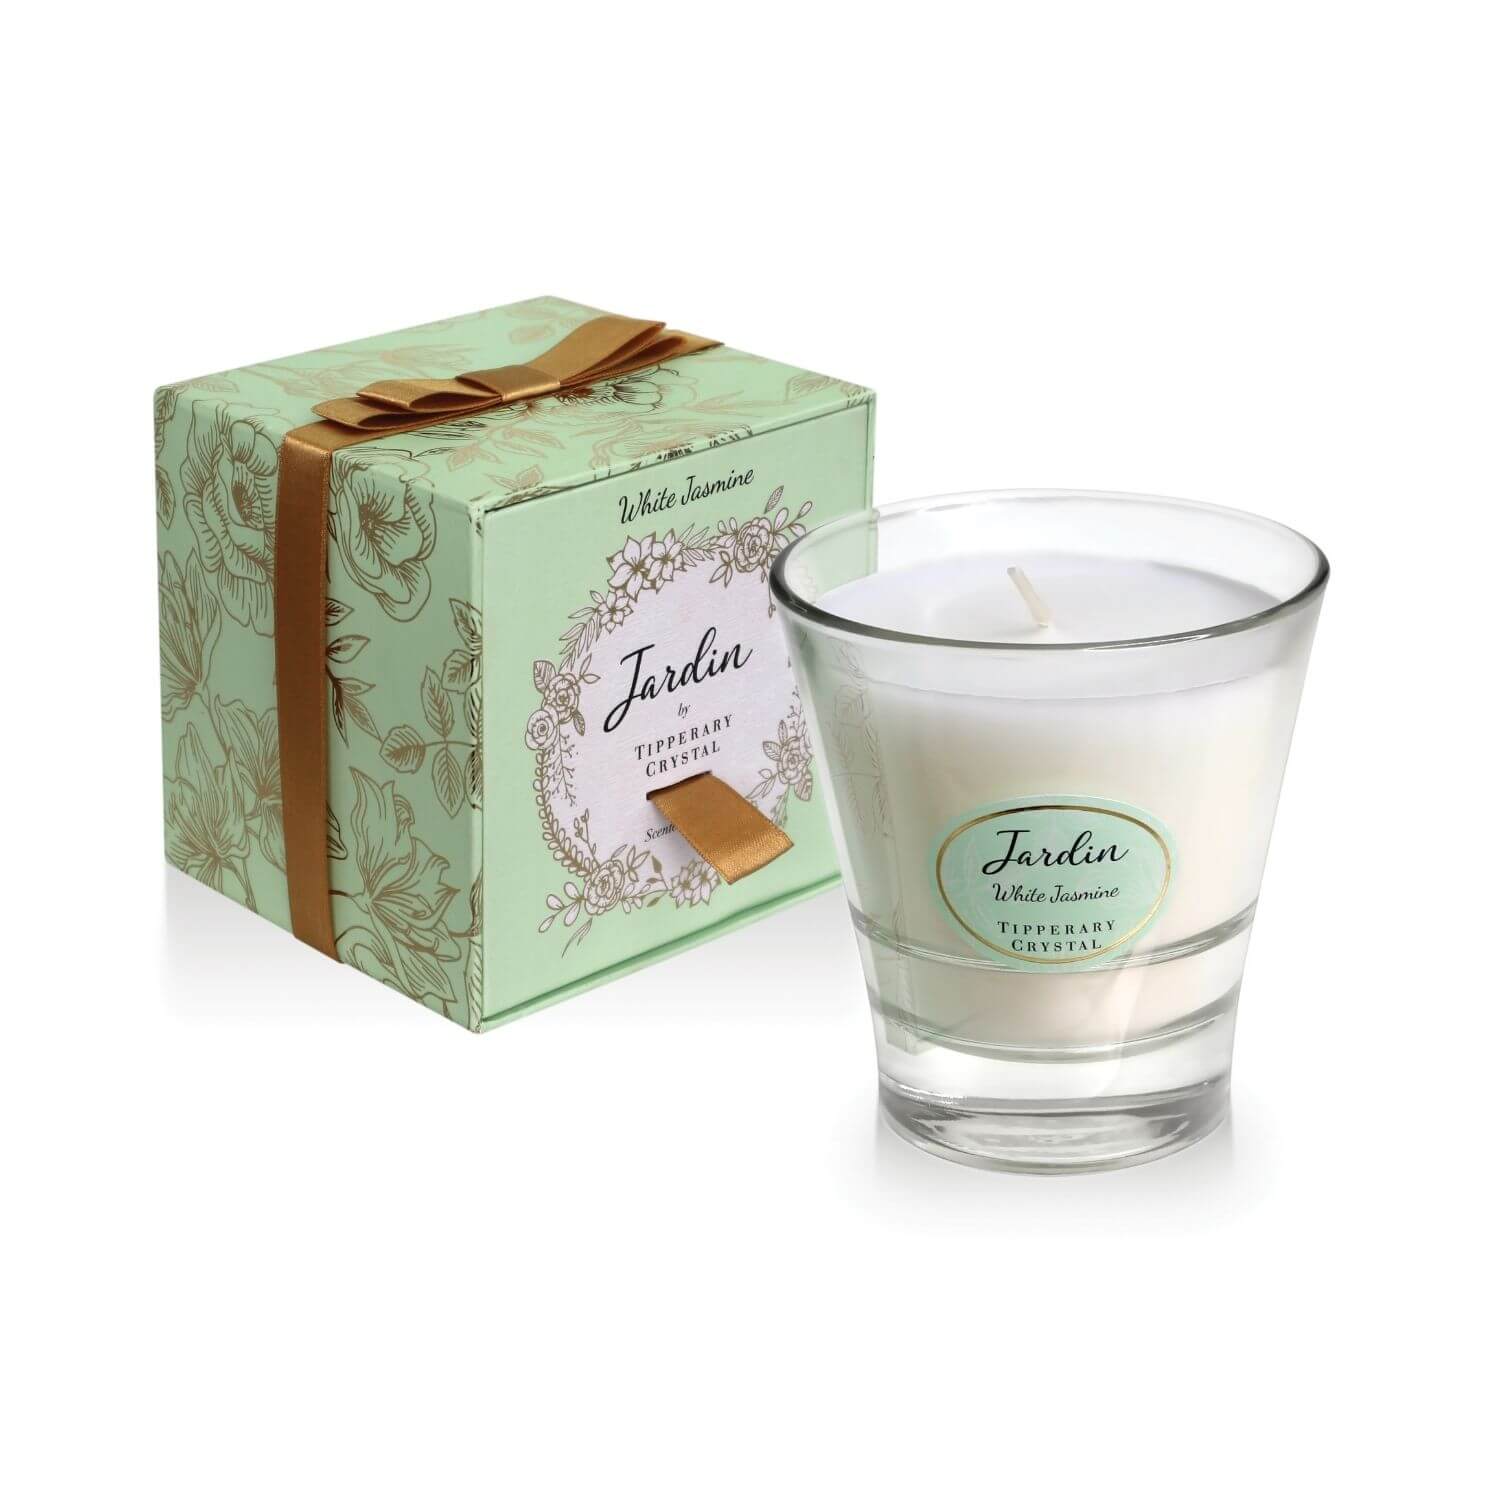 Tipperary Crystal Jardin Collection Candle - White Jasmine 1 Shaws Department Stores